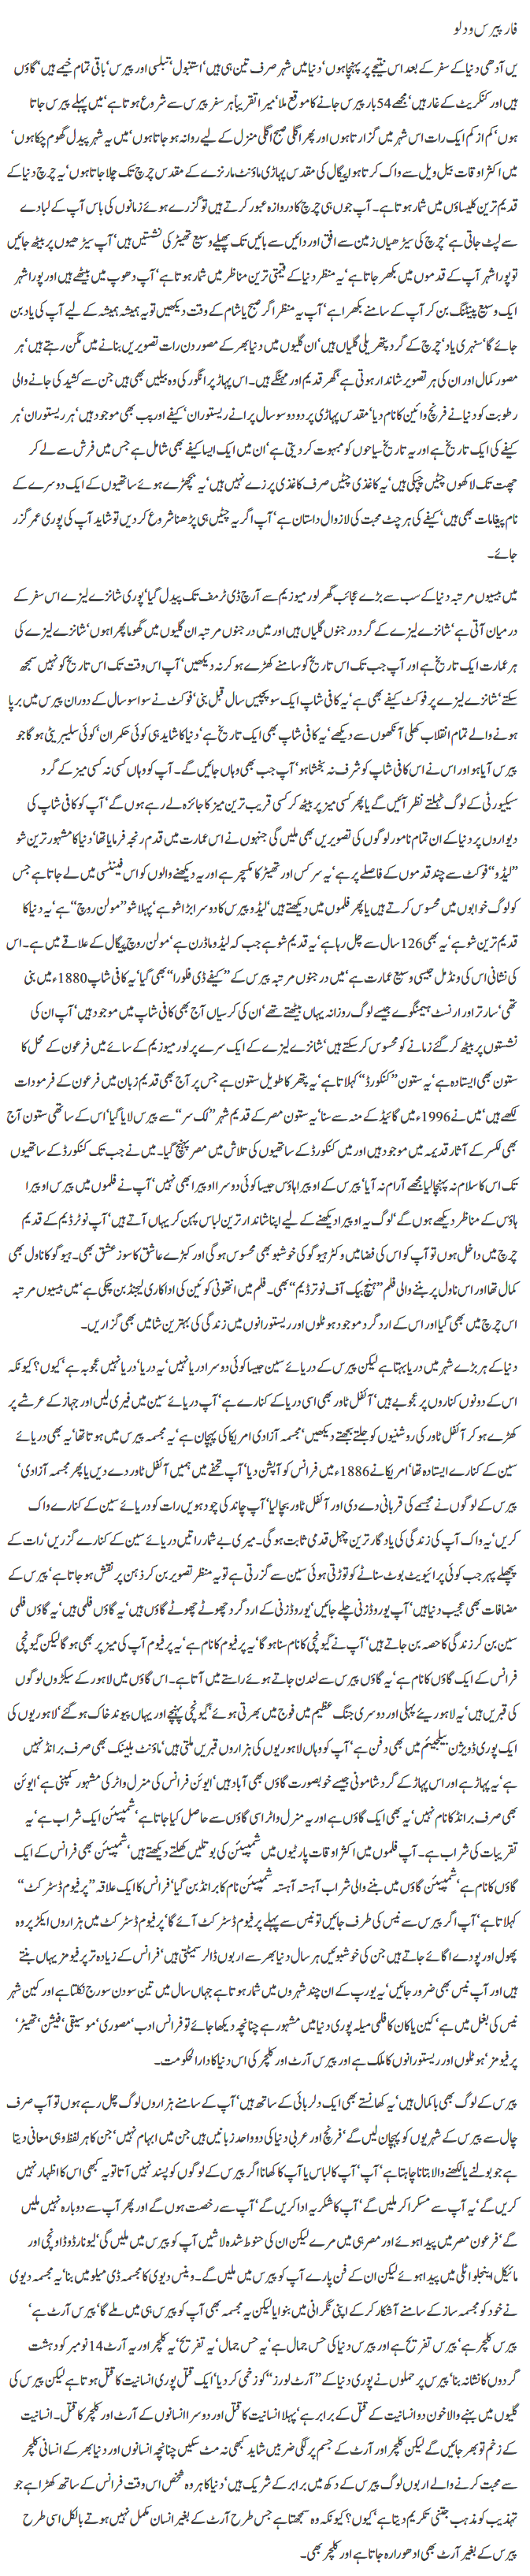 For Paris With Love by Javed Chaudhry